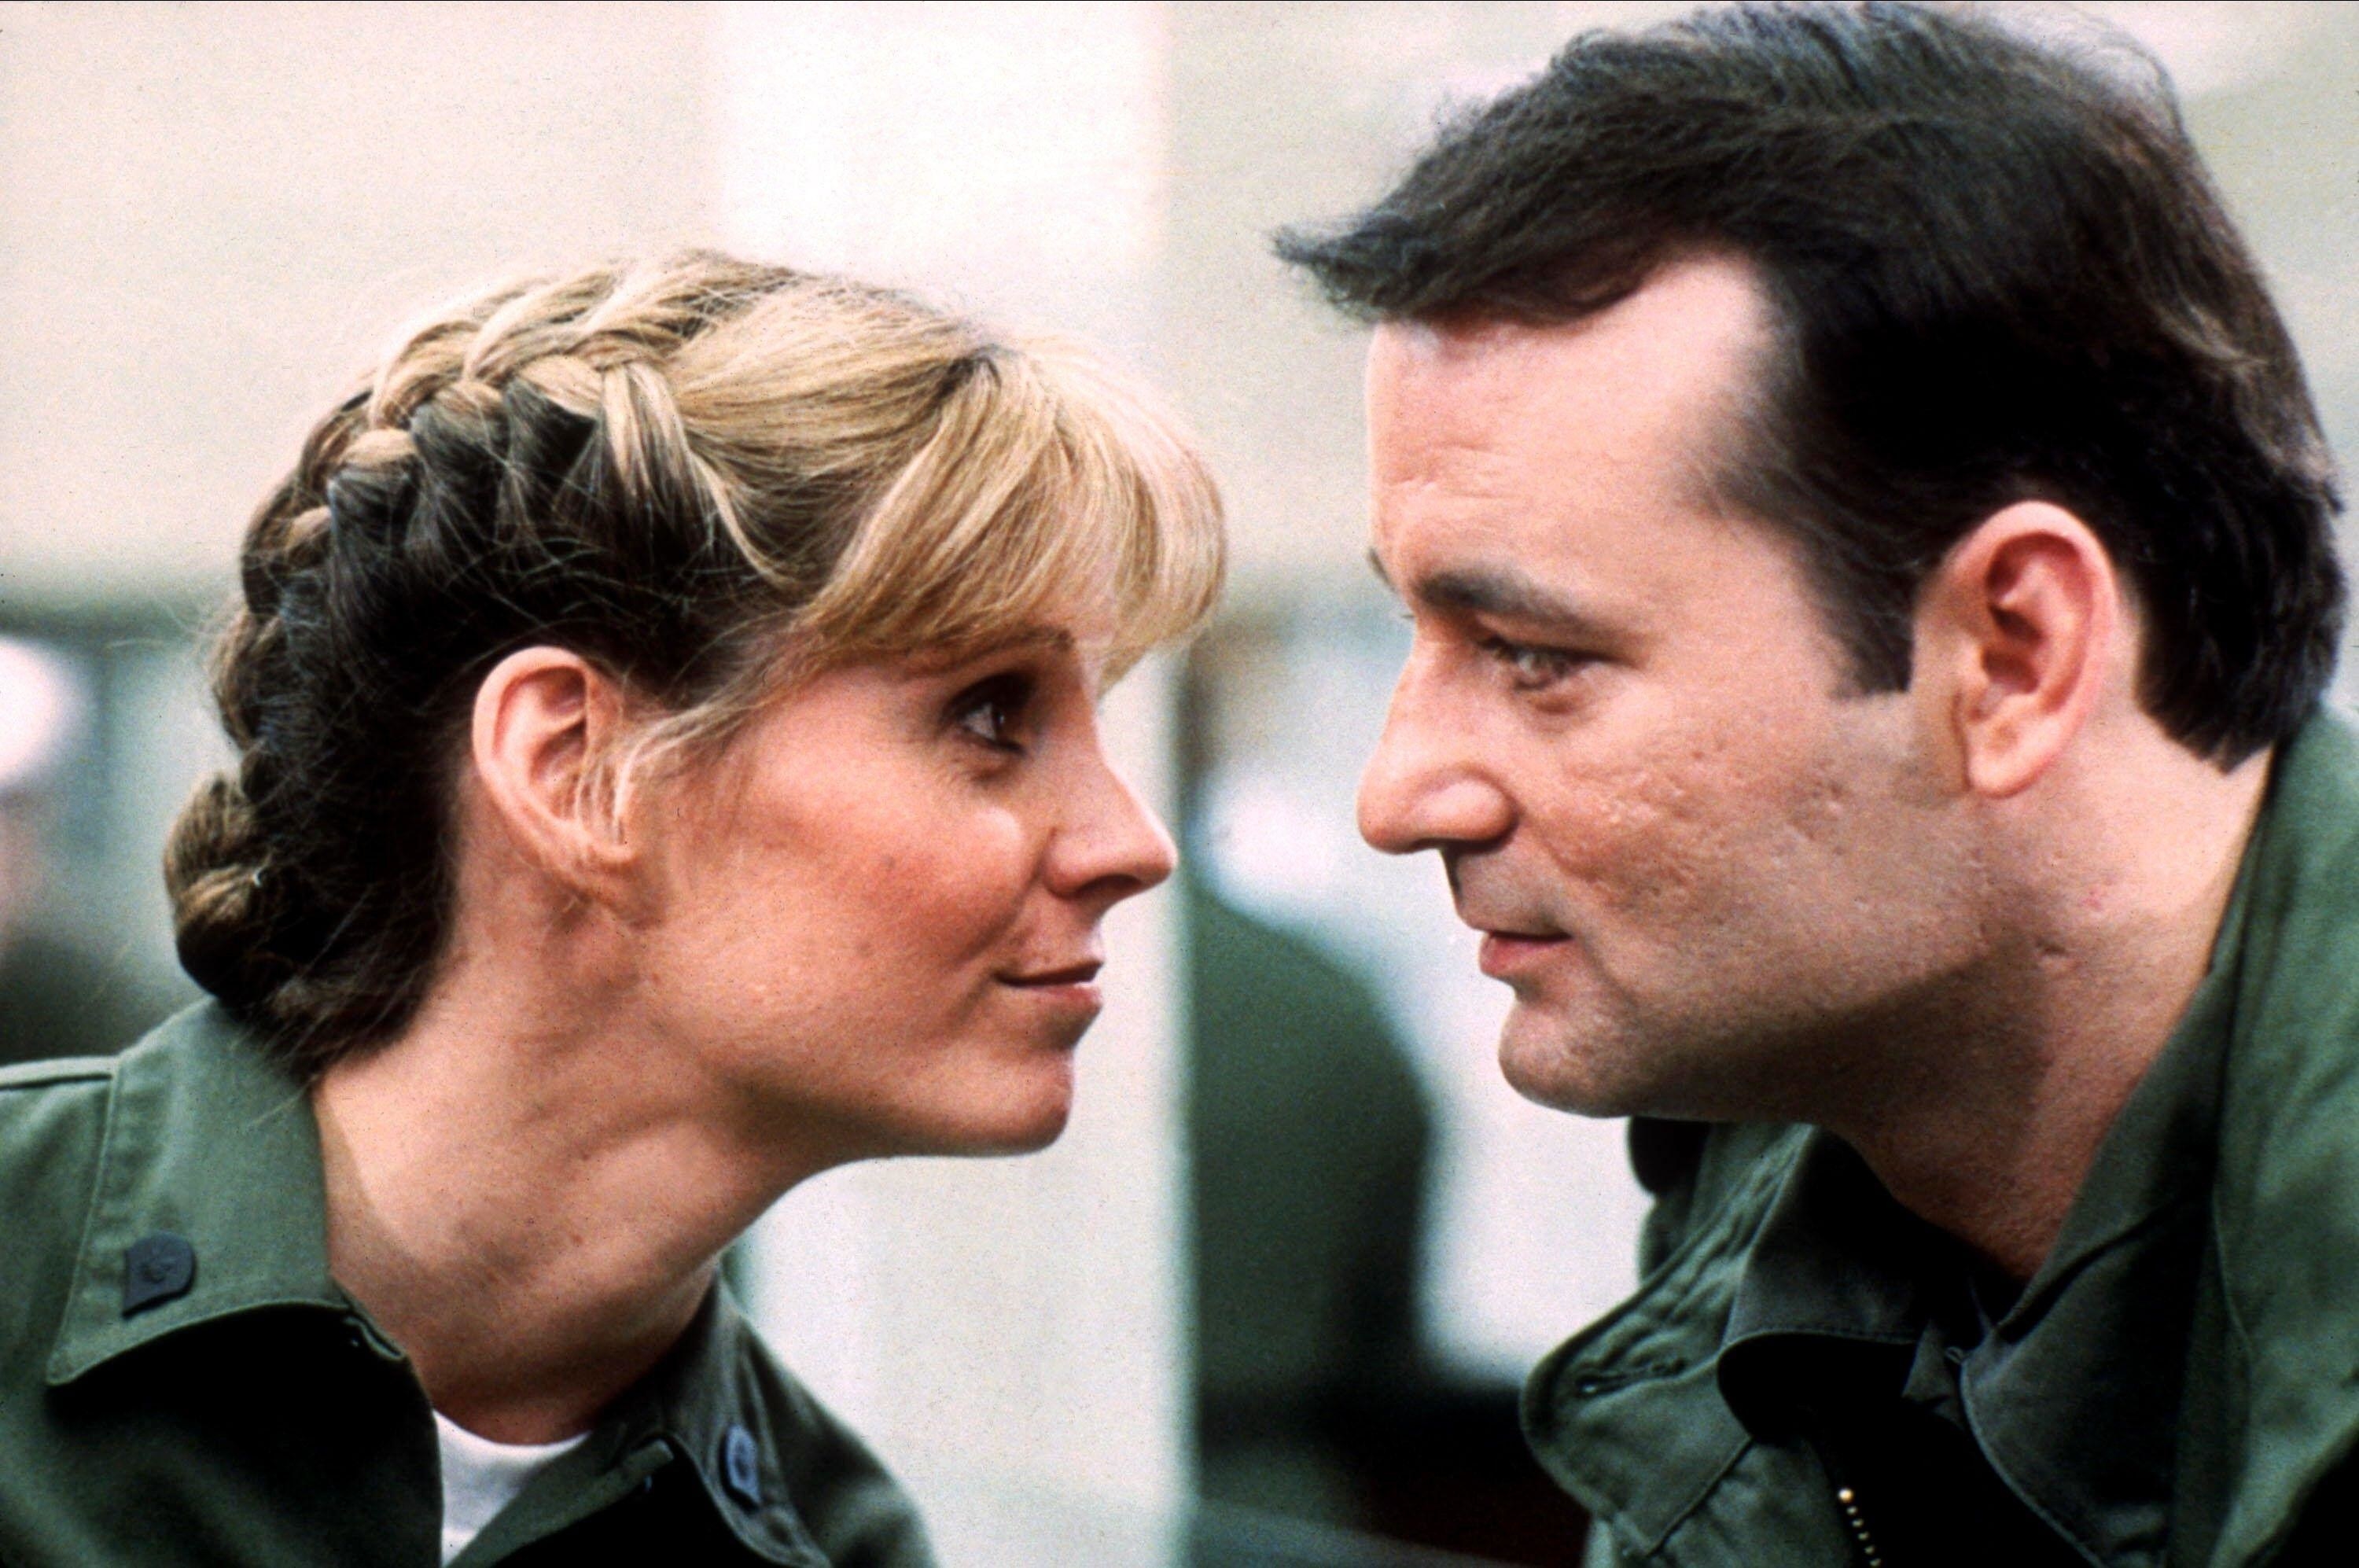 A male and female soldier draw close with a shared flirtatious glare